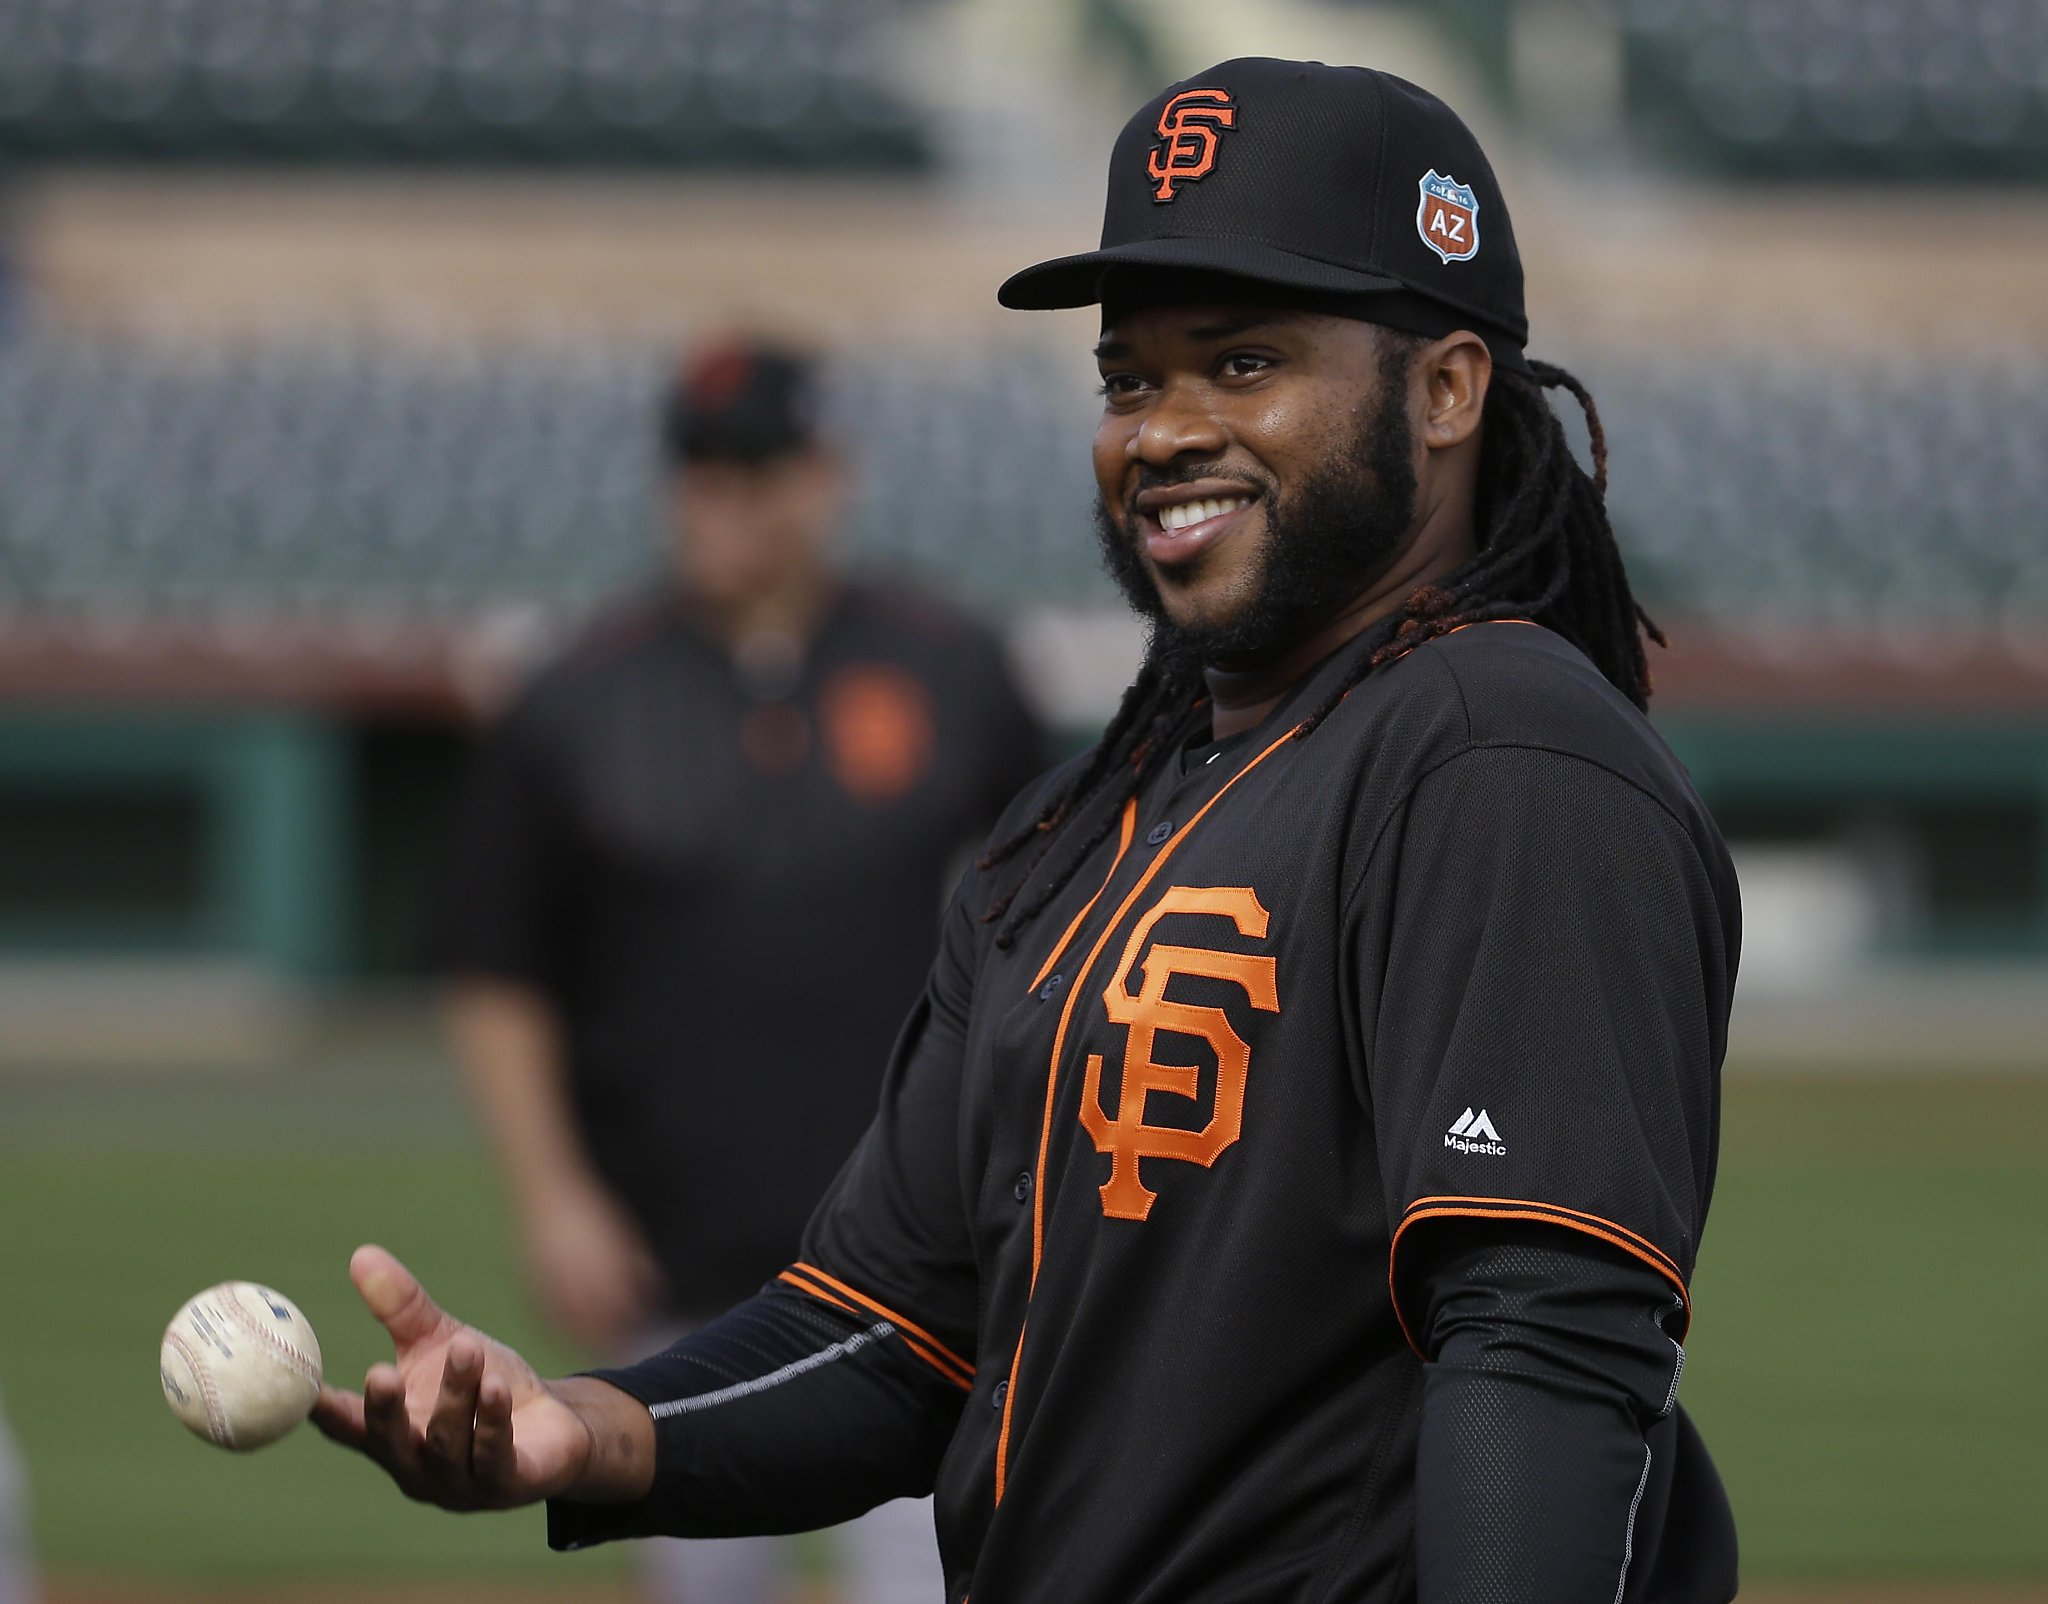 So Johnny Cueto Thinks He Can Dance